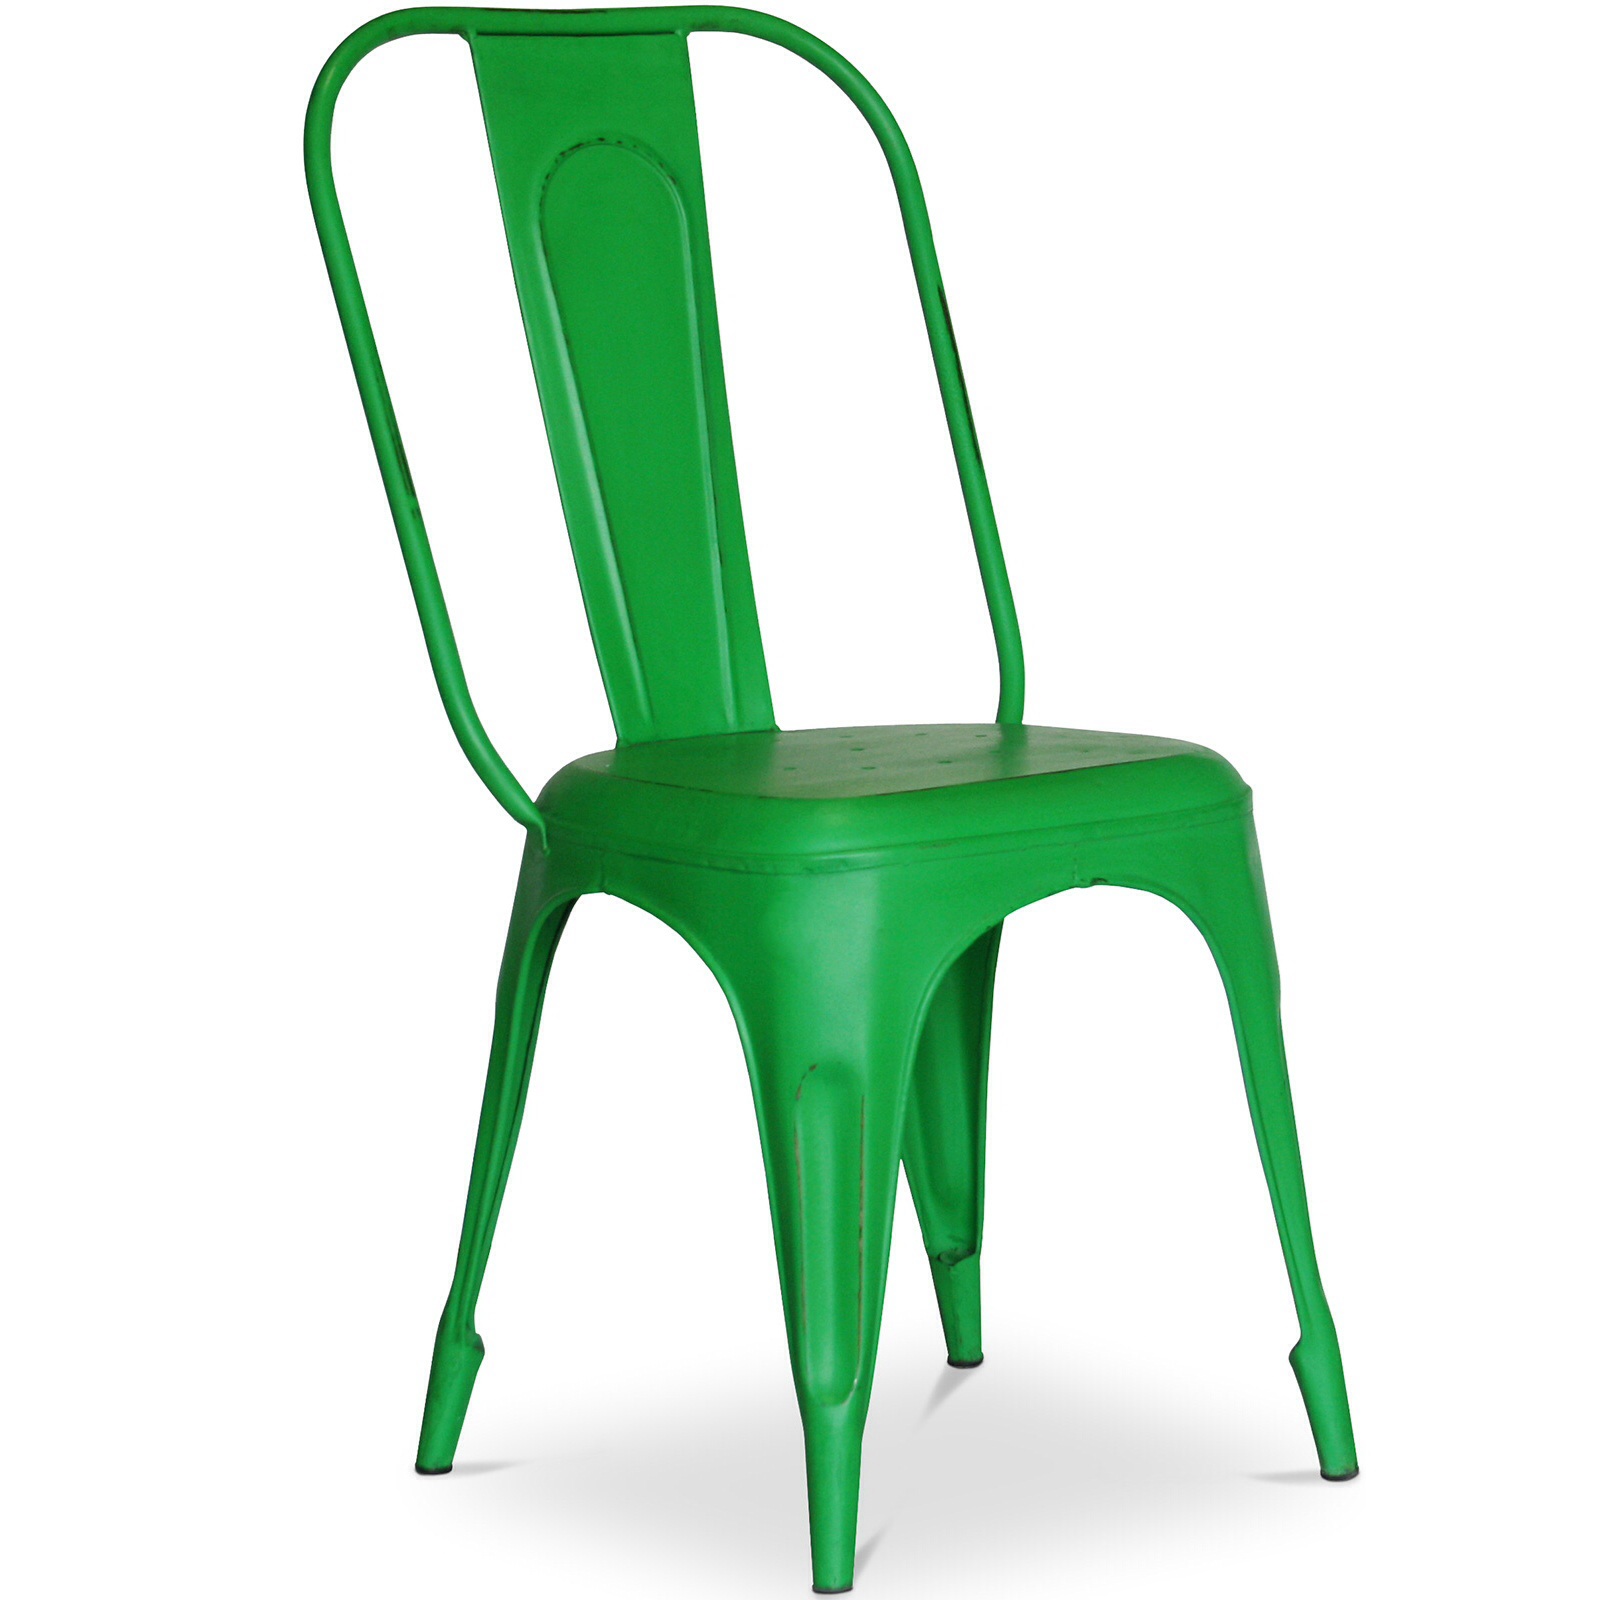 Bistro Retro Chair 450 mm high weathered Green